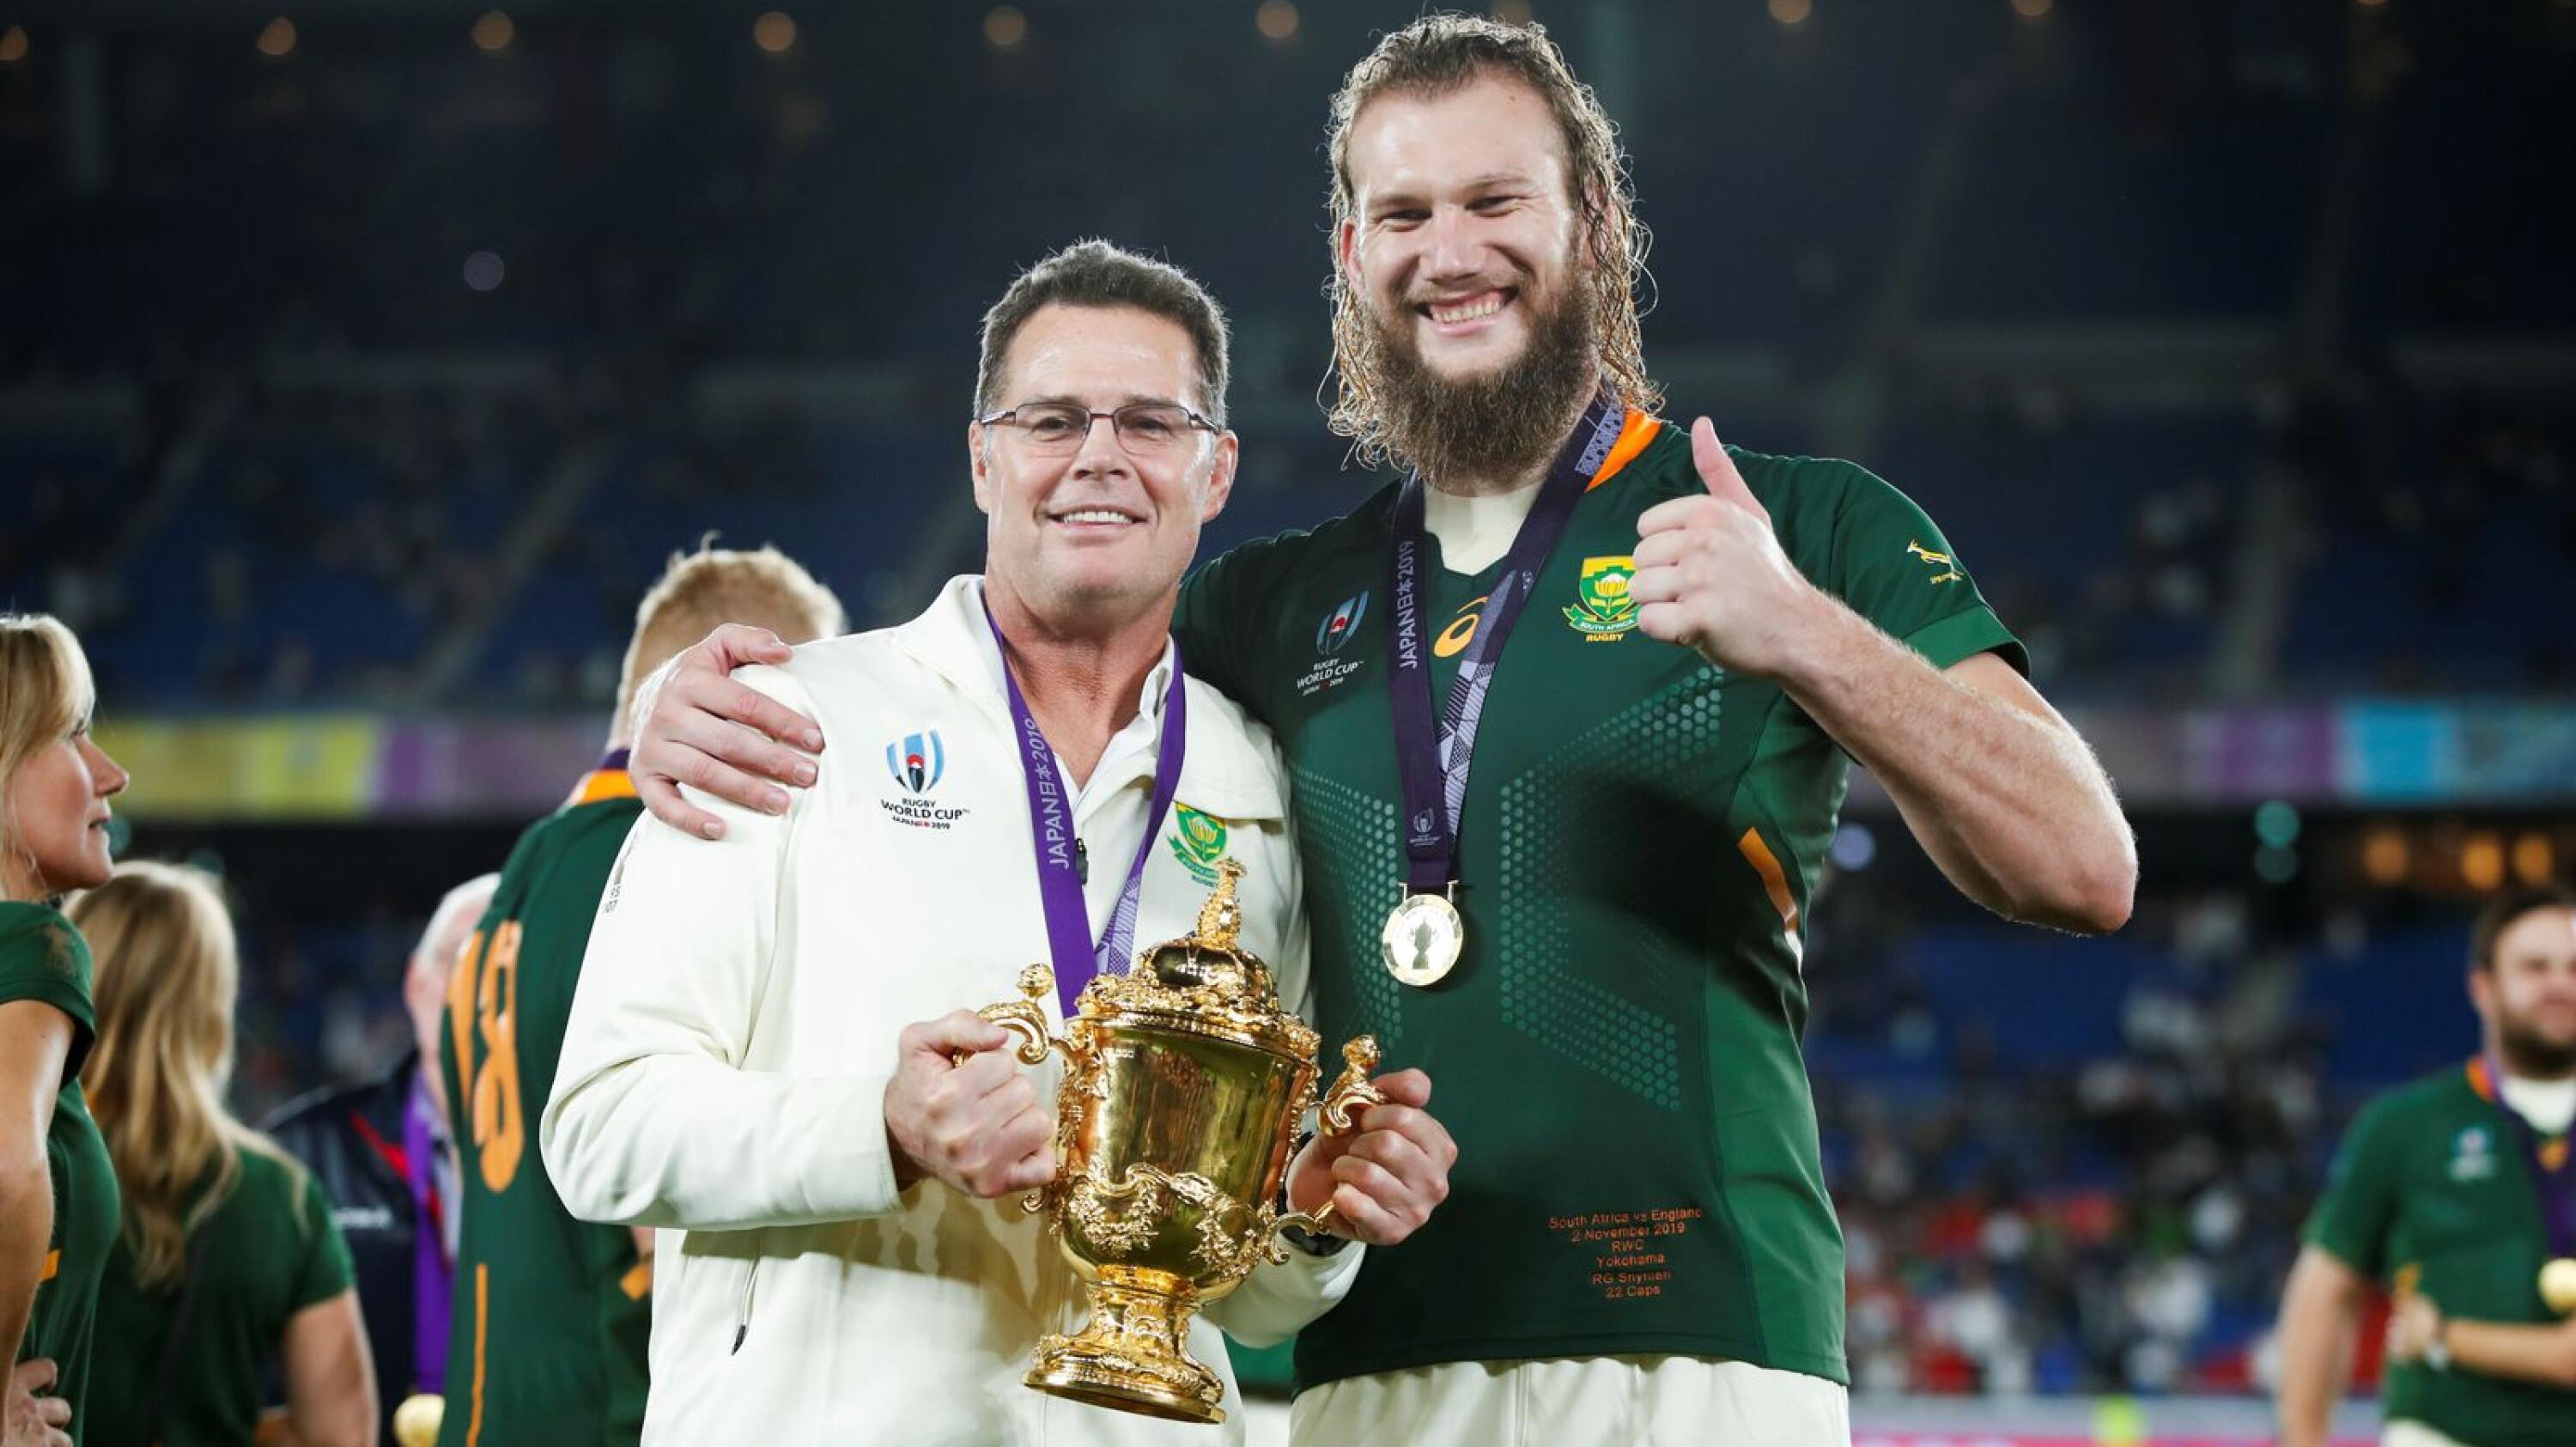 Rassie Erasmus poses with lock RG Snyman following their World Cup final win against England in 2019.